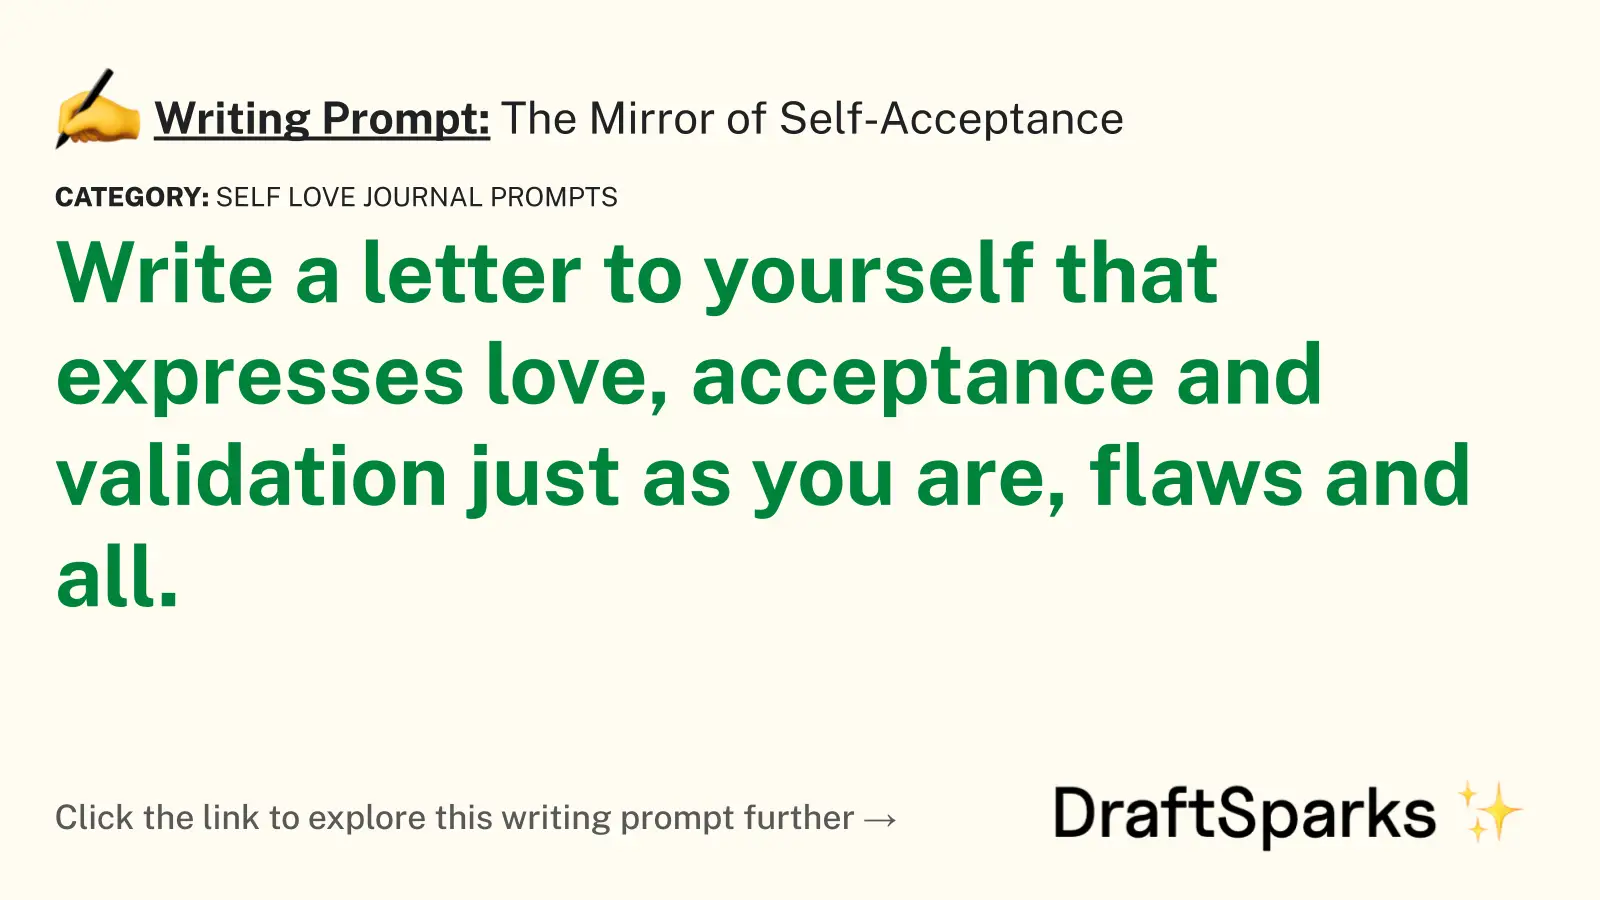 The Mirror of Self-Acceptance